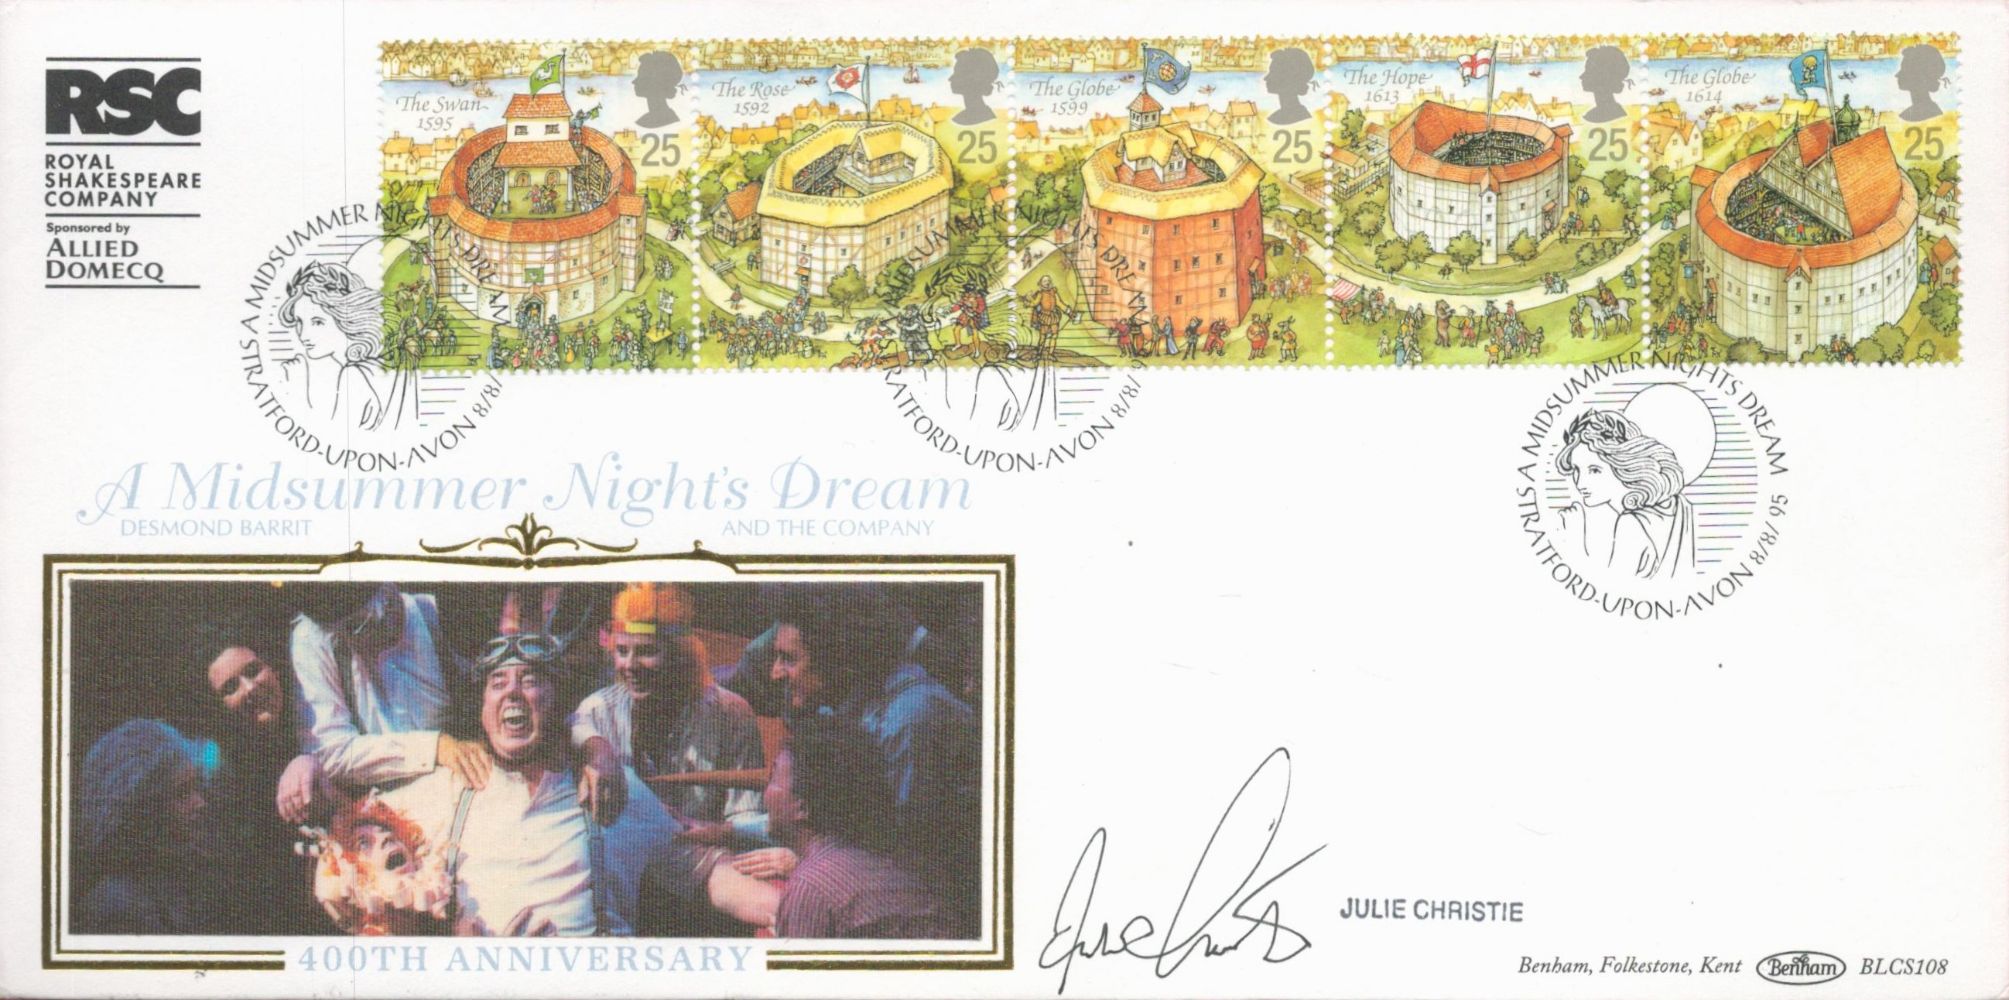 TIMED Autograph Auction Signed Covers FDCs Benham and Internetstamps official covers